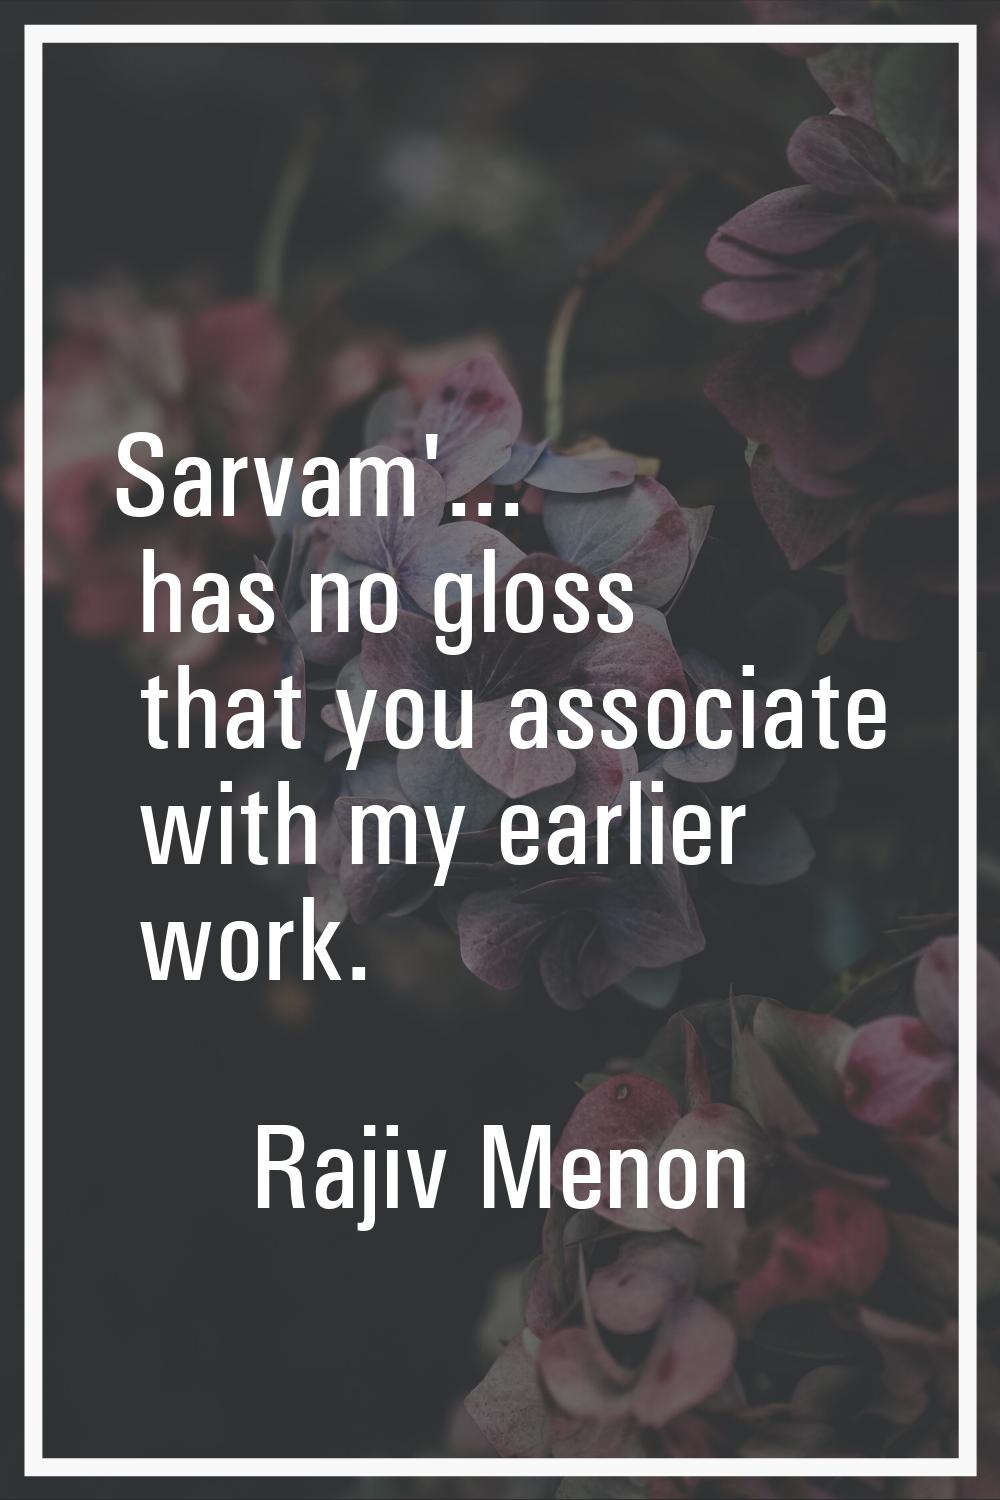 Sarvam'... has no gloss that you associate with my earlier work.